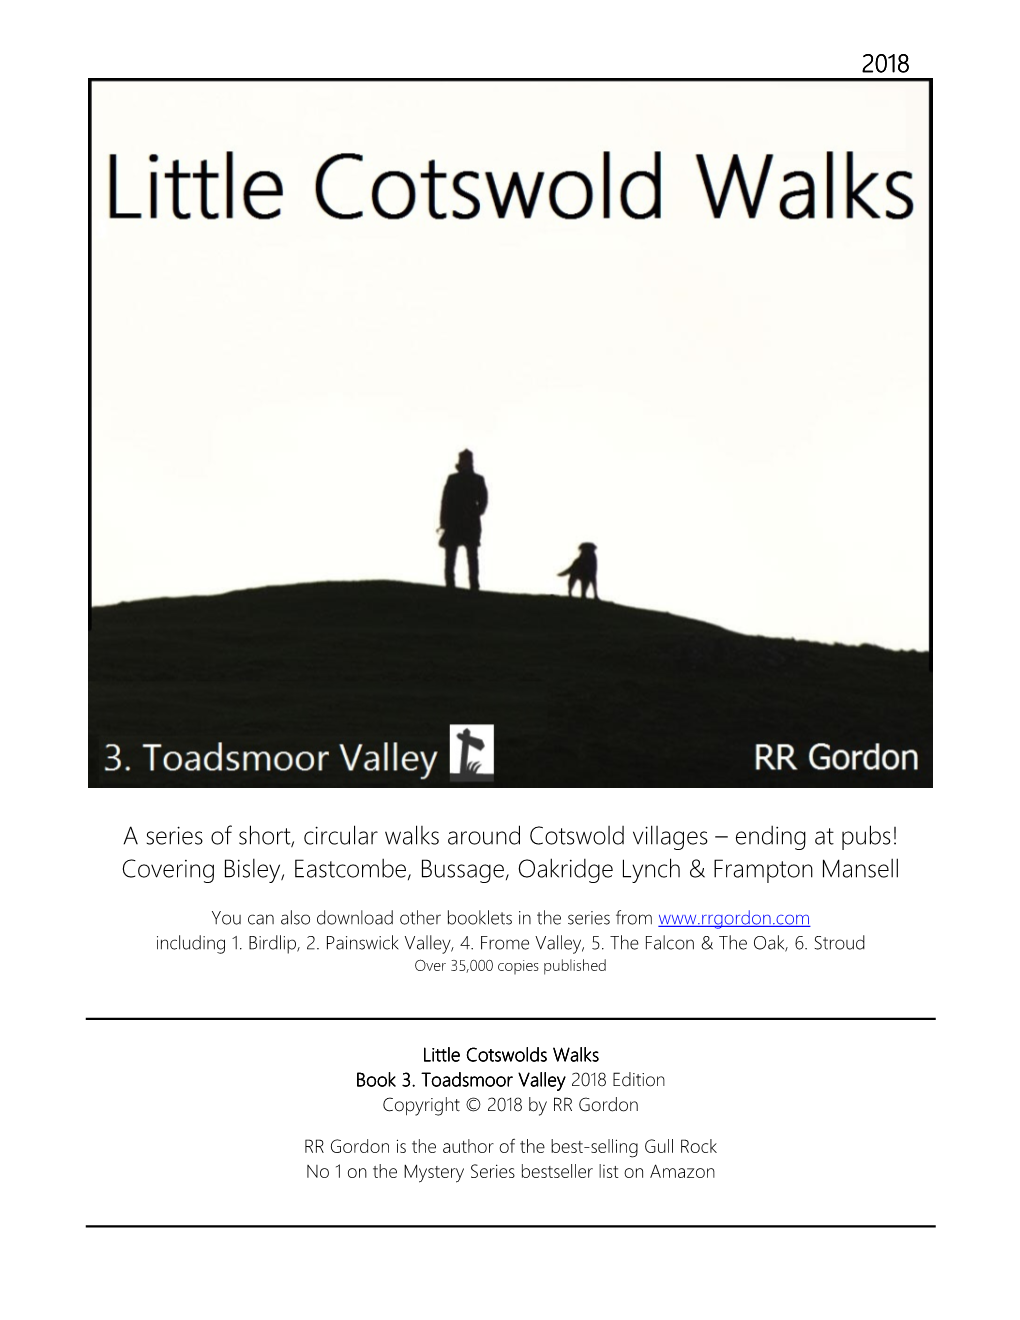 2018 a Series of Short, Circular Walks Around Cotswold Villages – Ending at Pubs! Covering Bisley, Eastcombe, Bussage, Oakridg